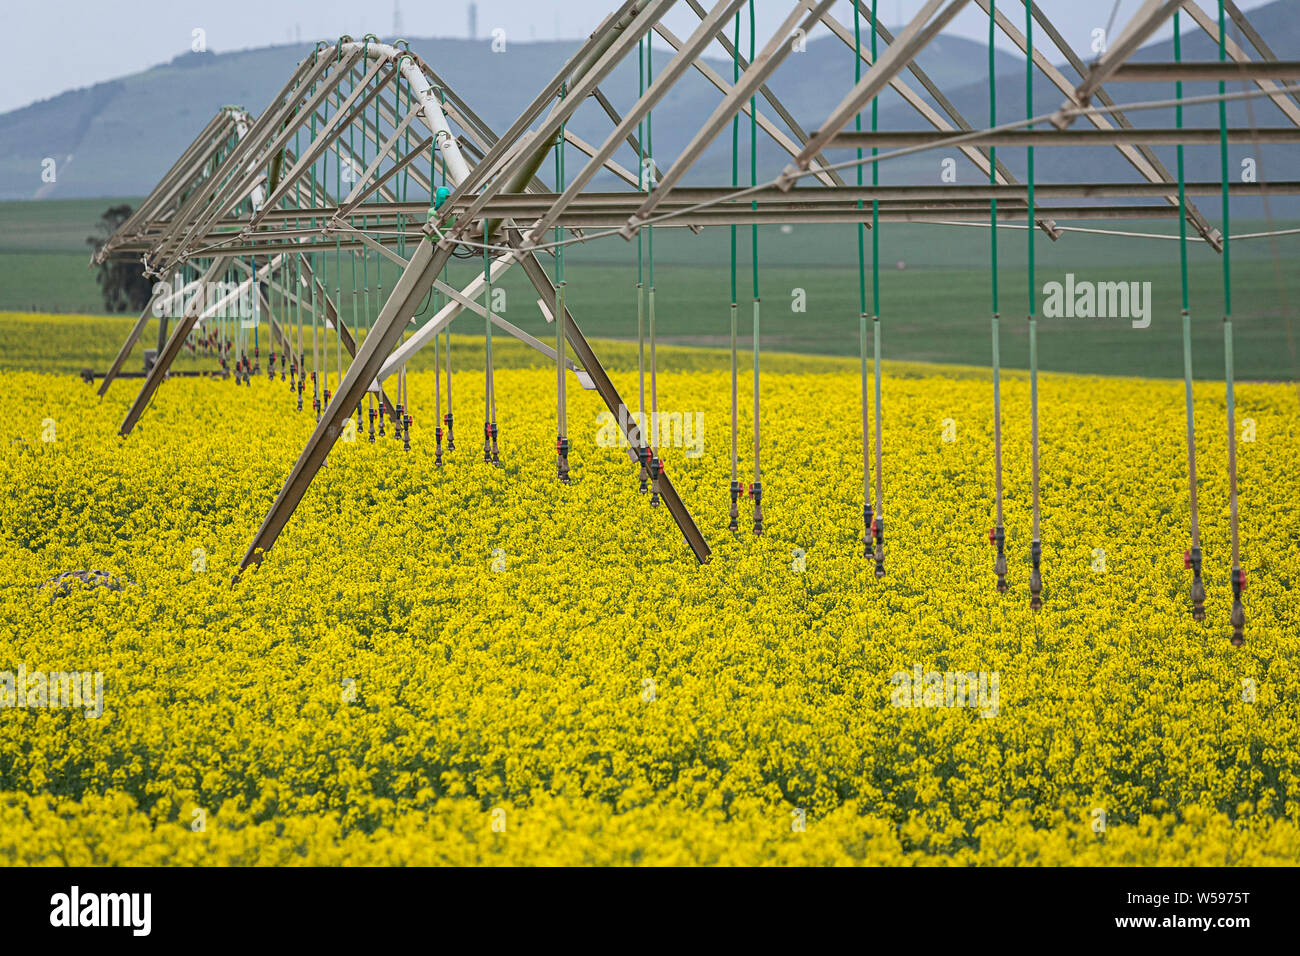 Canola (rapeseed) fields and an irrigation system Stock Photo